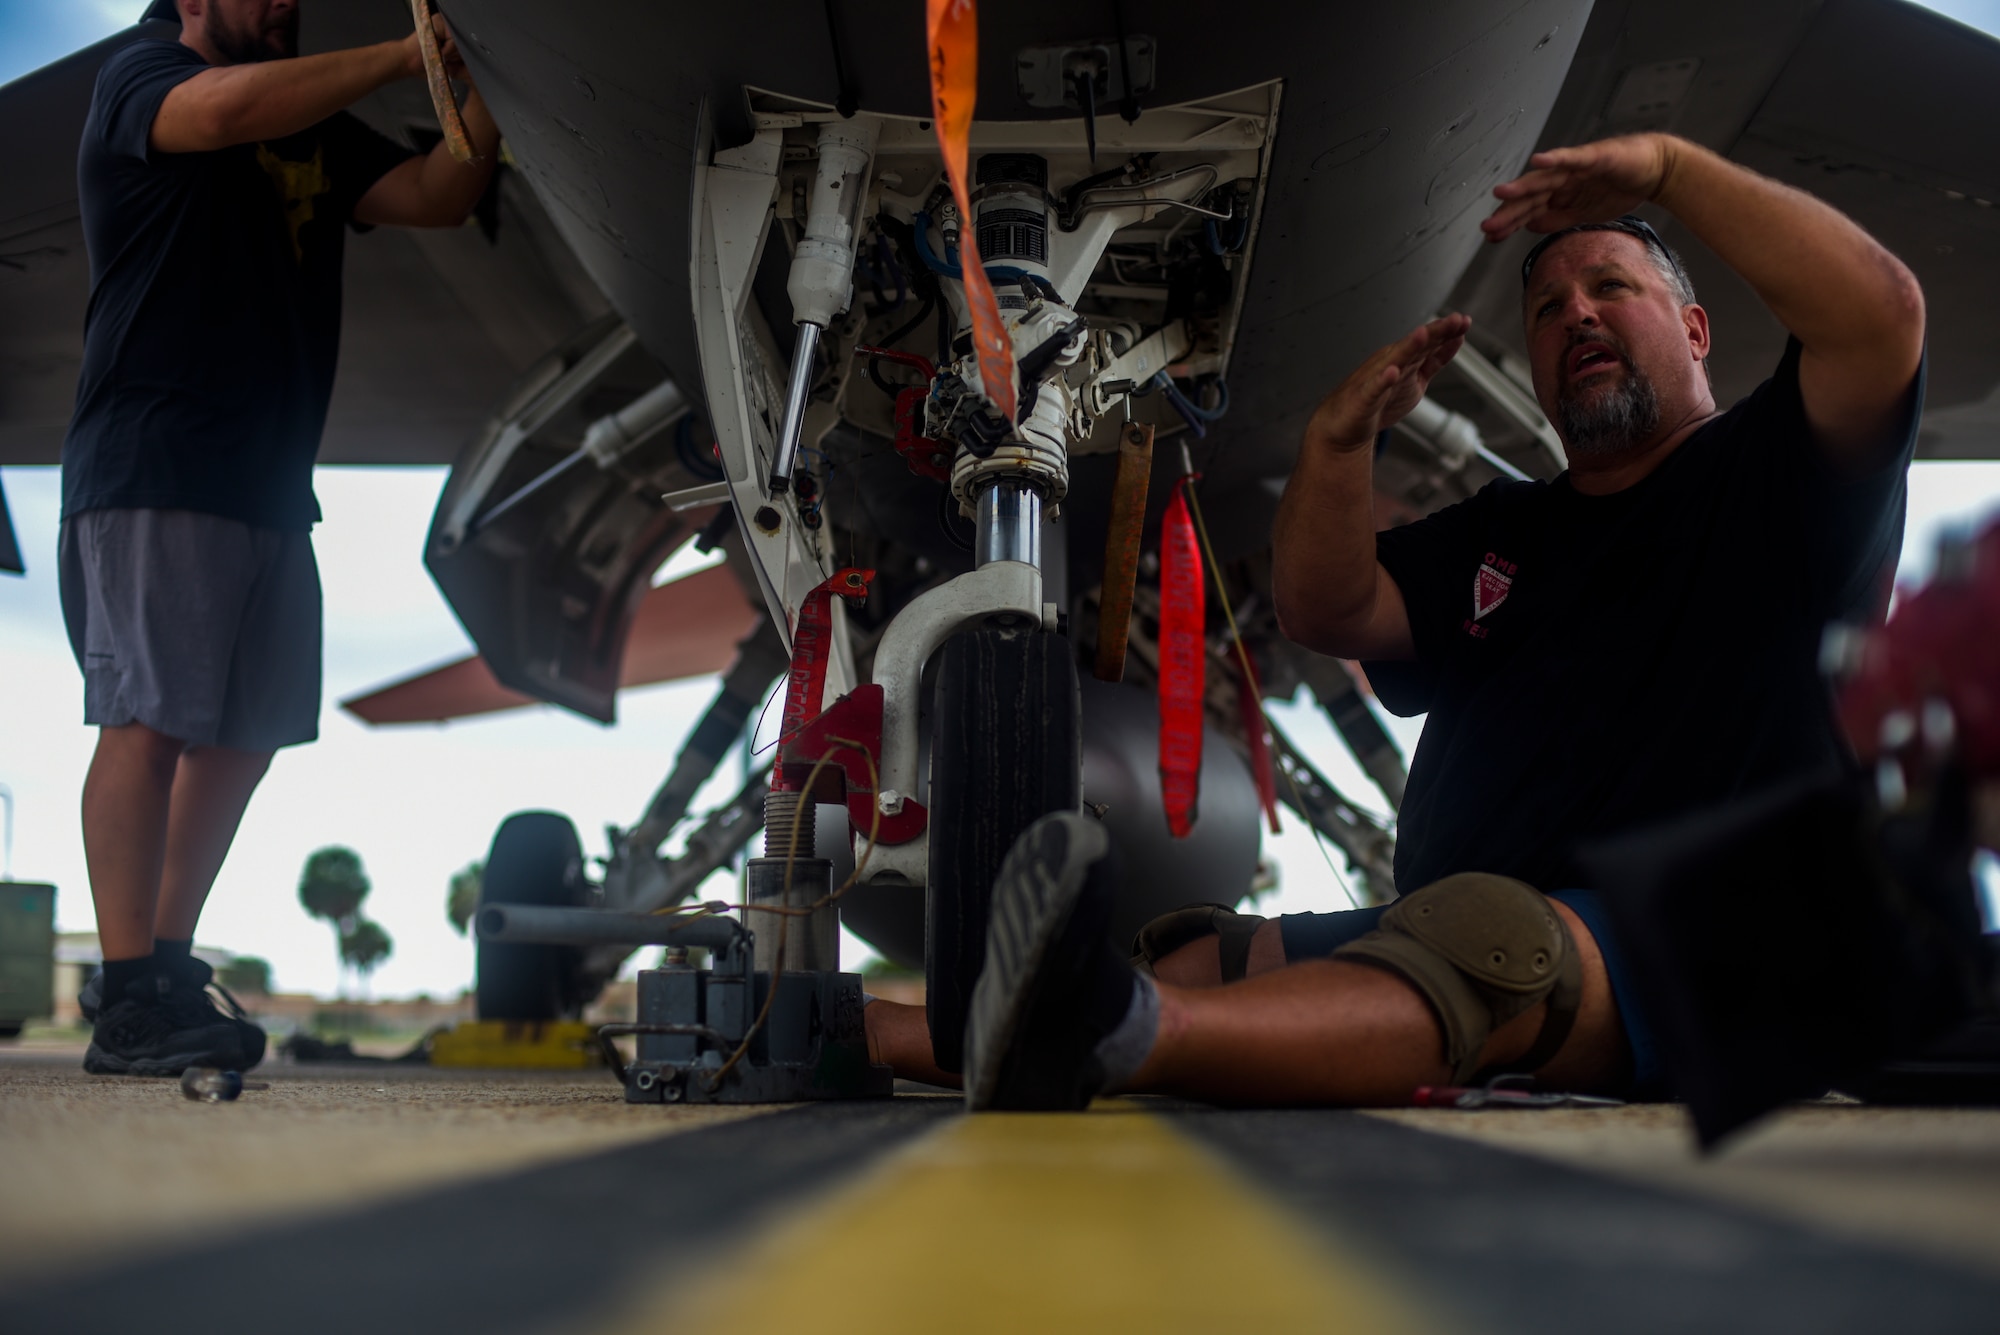 Michael Reeves with the 82nd Aerial Targets Squadron, contractor, works to replace the front landing tire on a QF-16 at Tyndall Air Force Base, Florida, July 9, 2020. The 82nd ARTS contractors fulfill a variety of different flight line technical skills, including replacing old or malfunctioning landing gear. (U.S. Air Force photo by Staff Sgt. Magen M. Reeves)